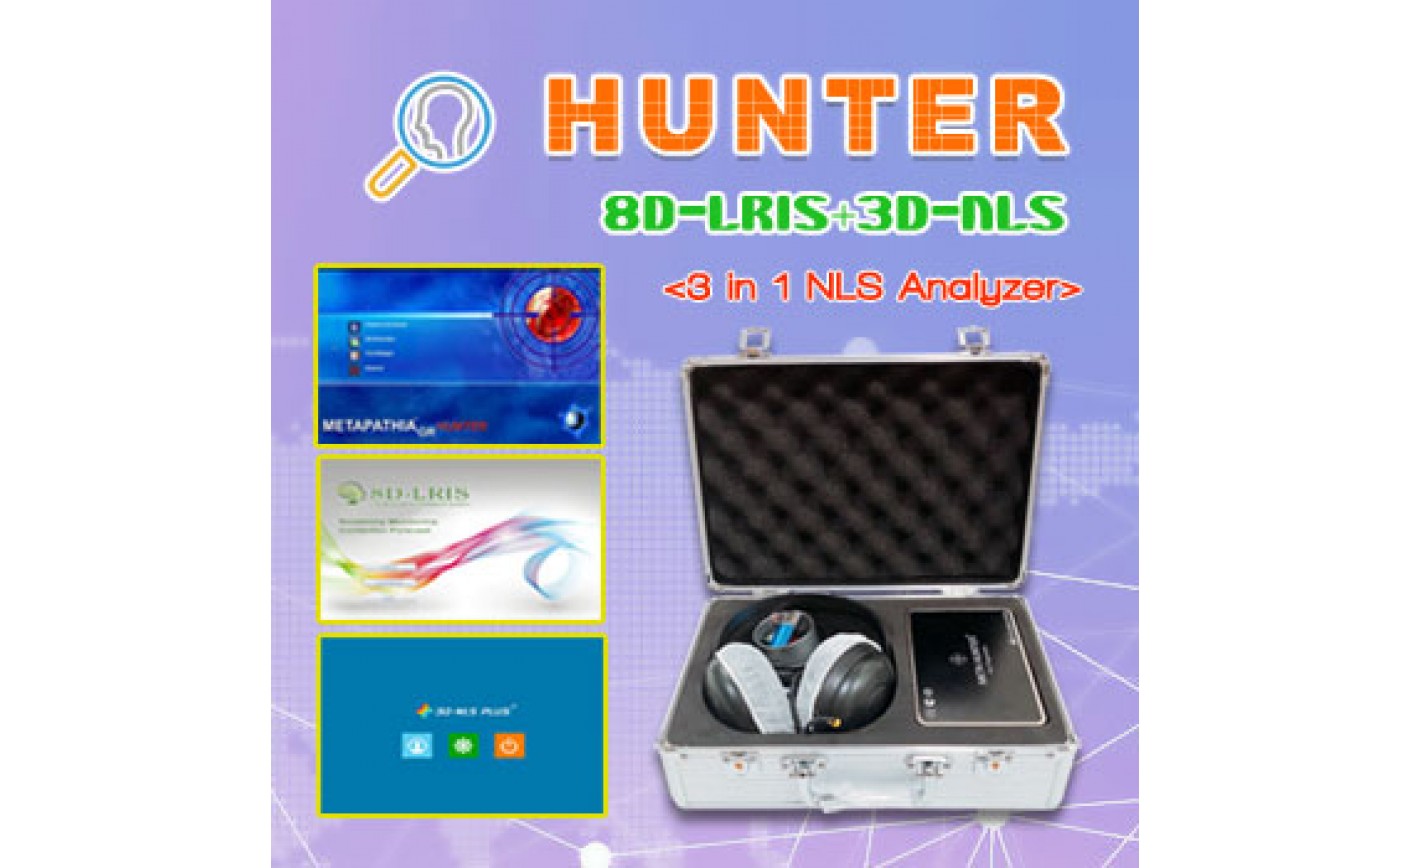 Metatron 4025 Hunter Is The Suitable Device For NLS-diagnostics Of Skin Diseases